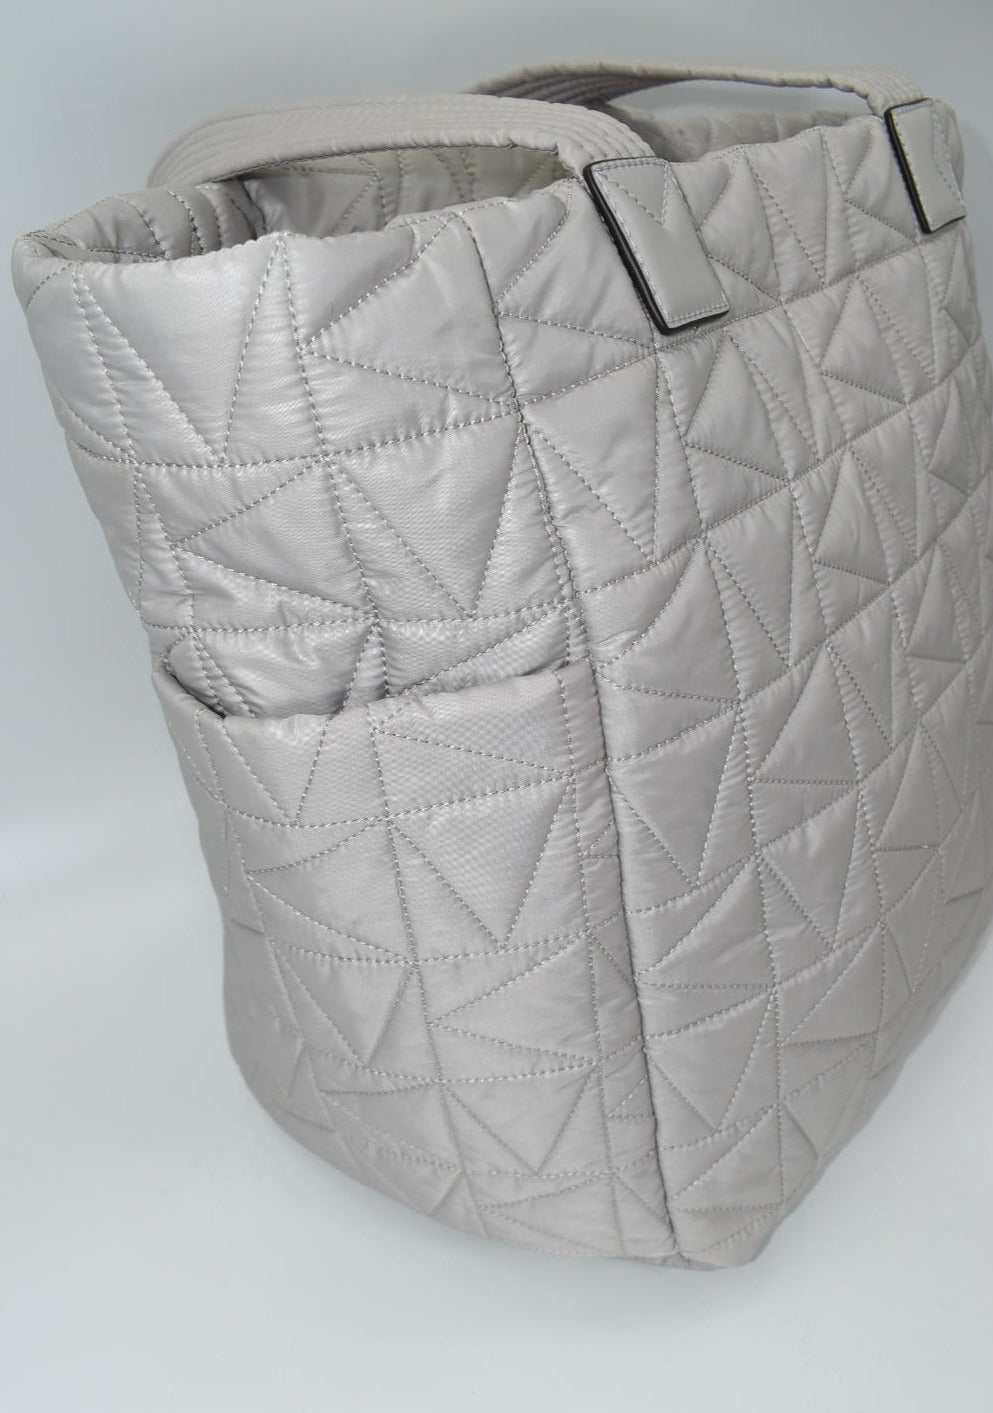 Michael Kors Winnie Large Quilted Tote Bag in Aluminum Color